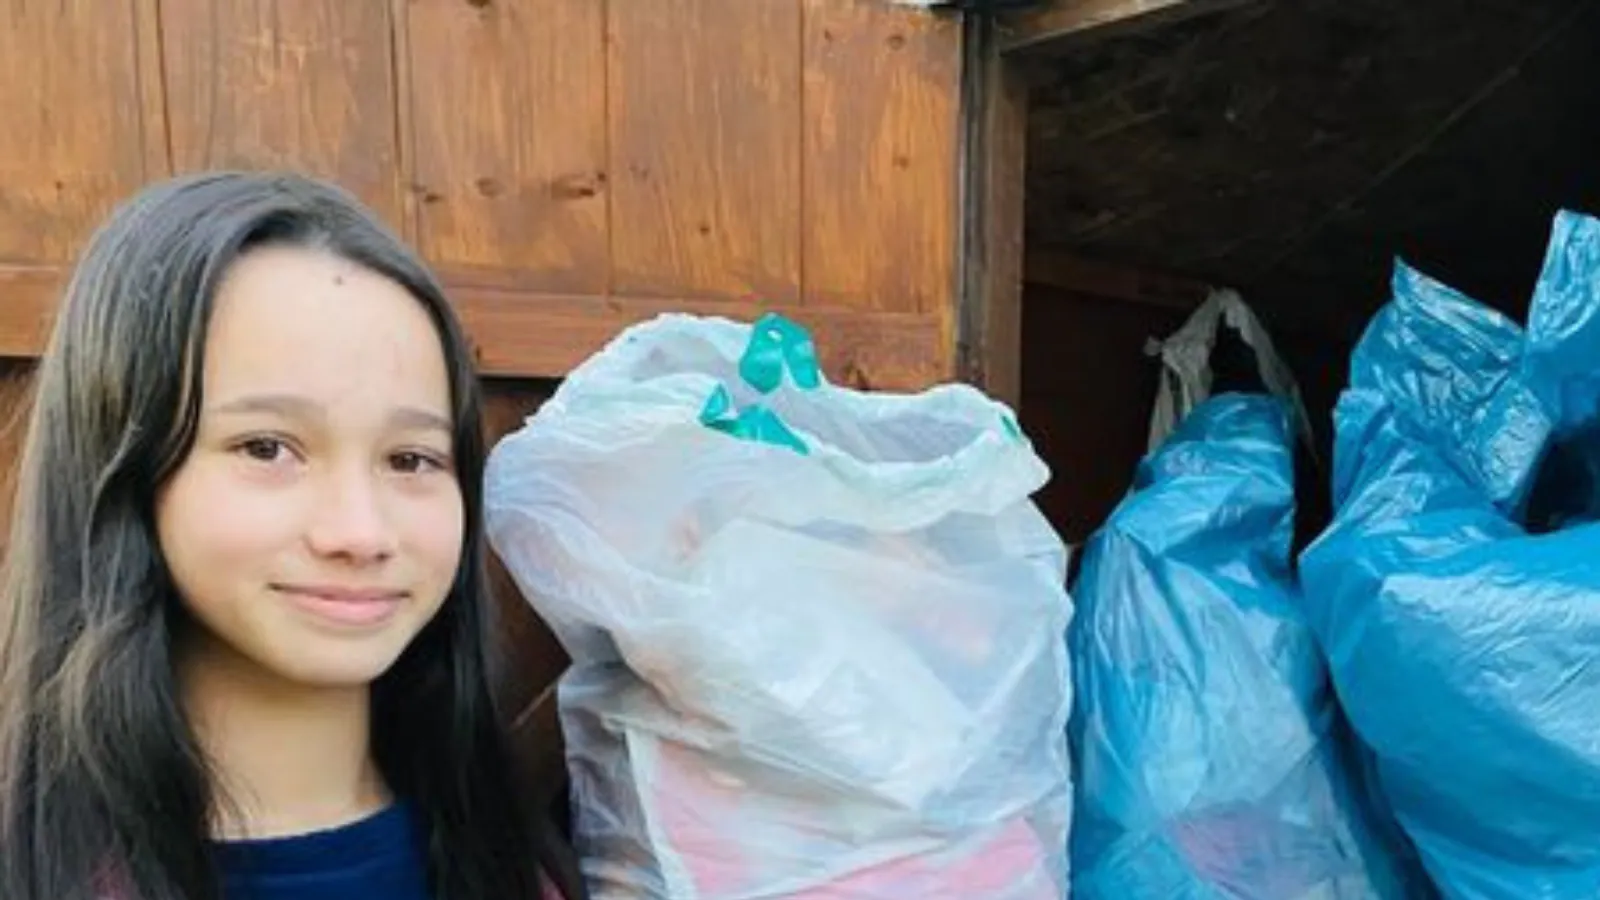 11-Year-Old UK Girl Makes Blankets For Homeless People Using Chips Packets